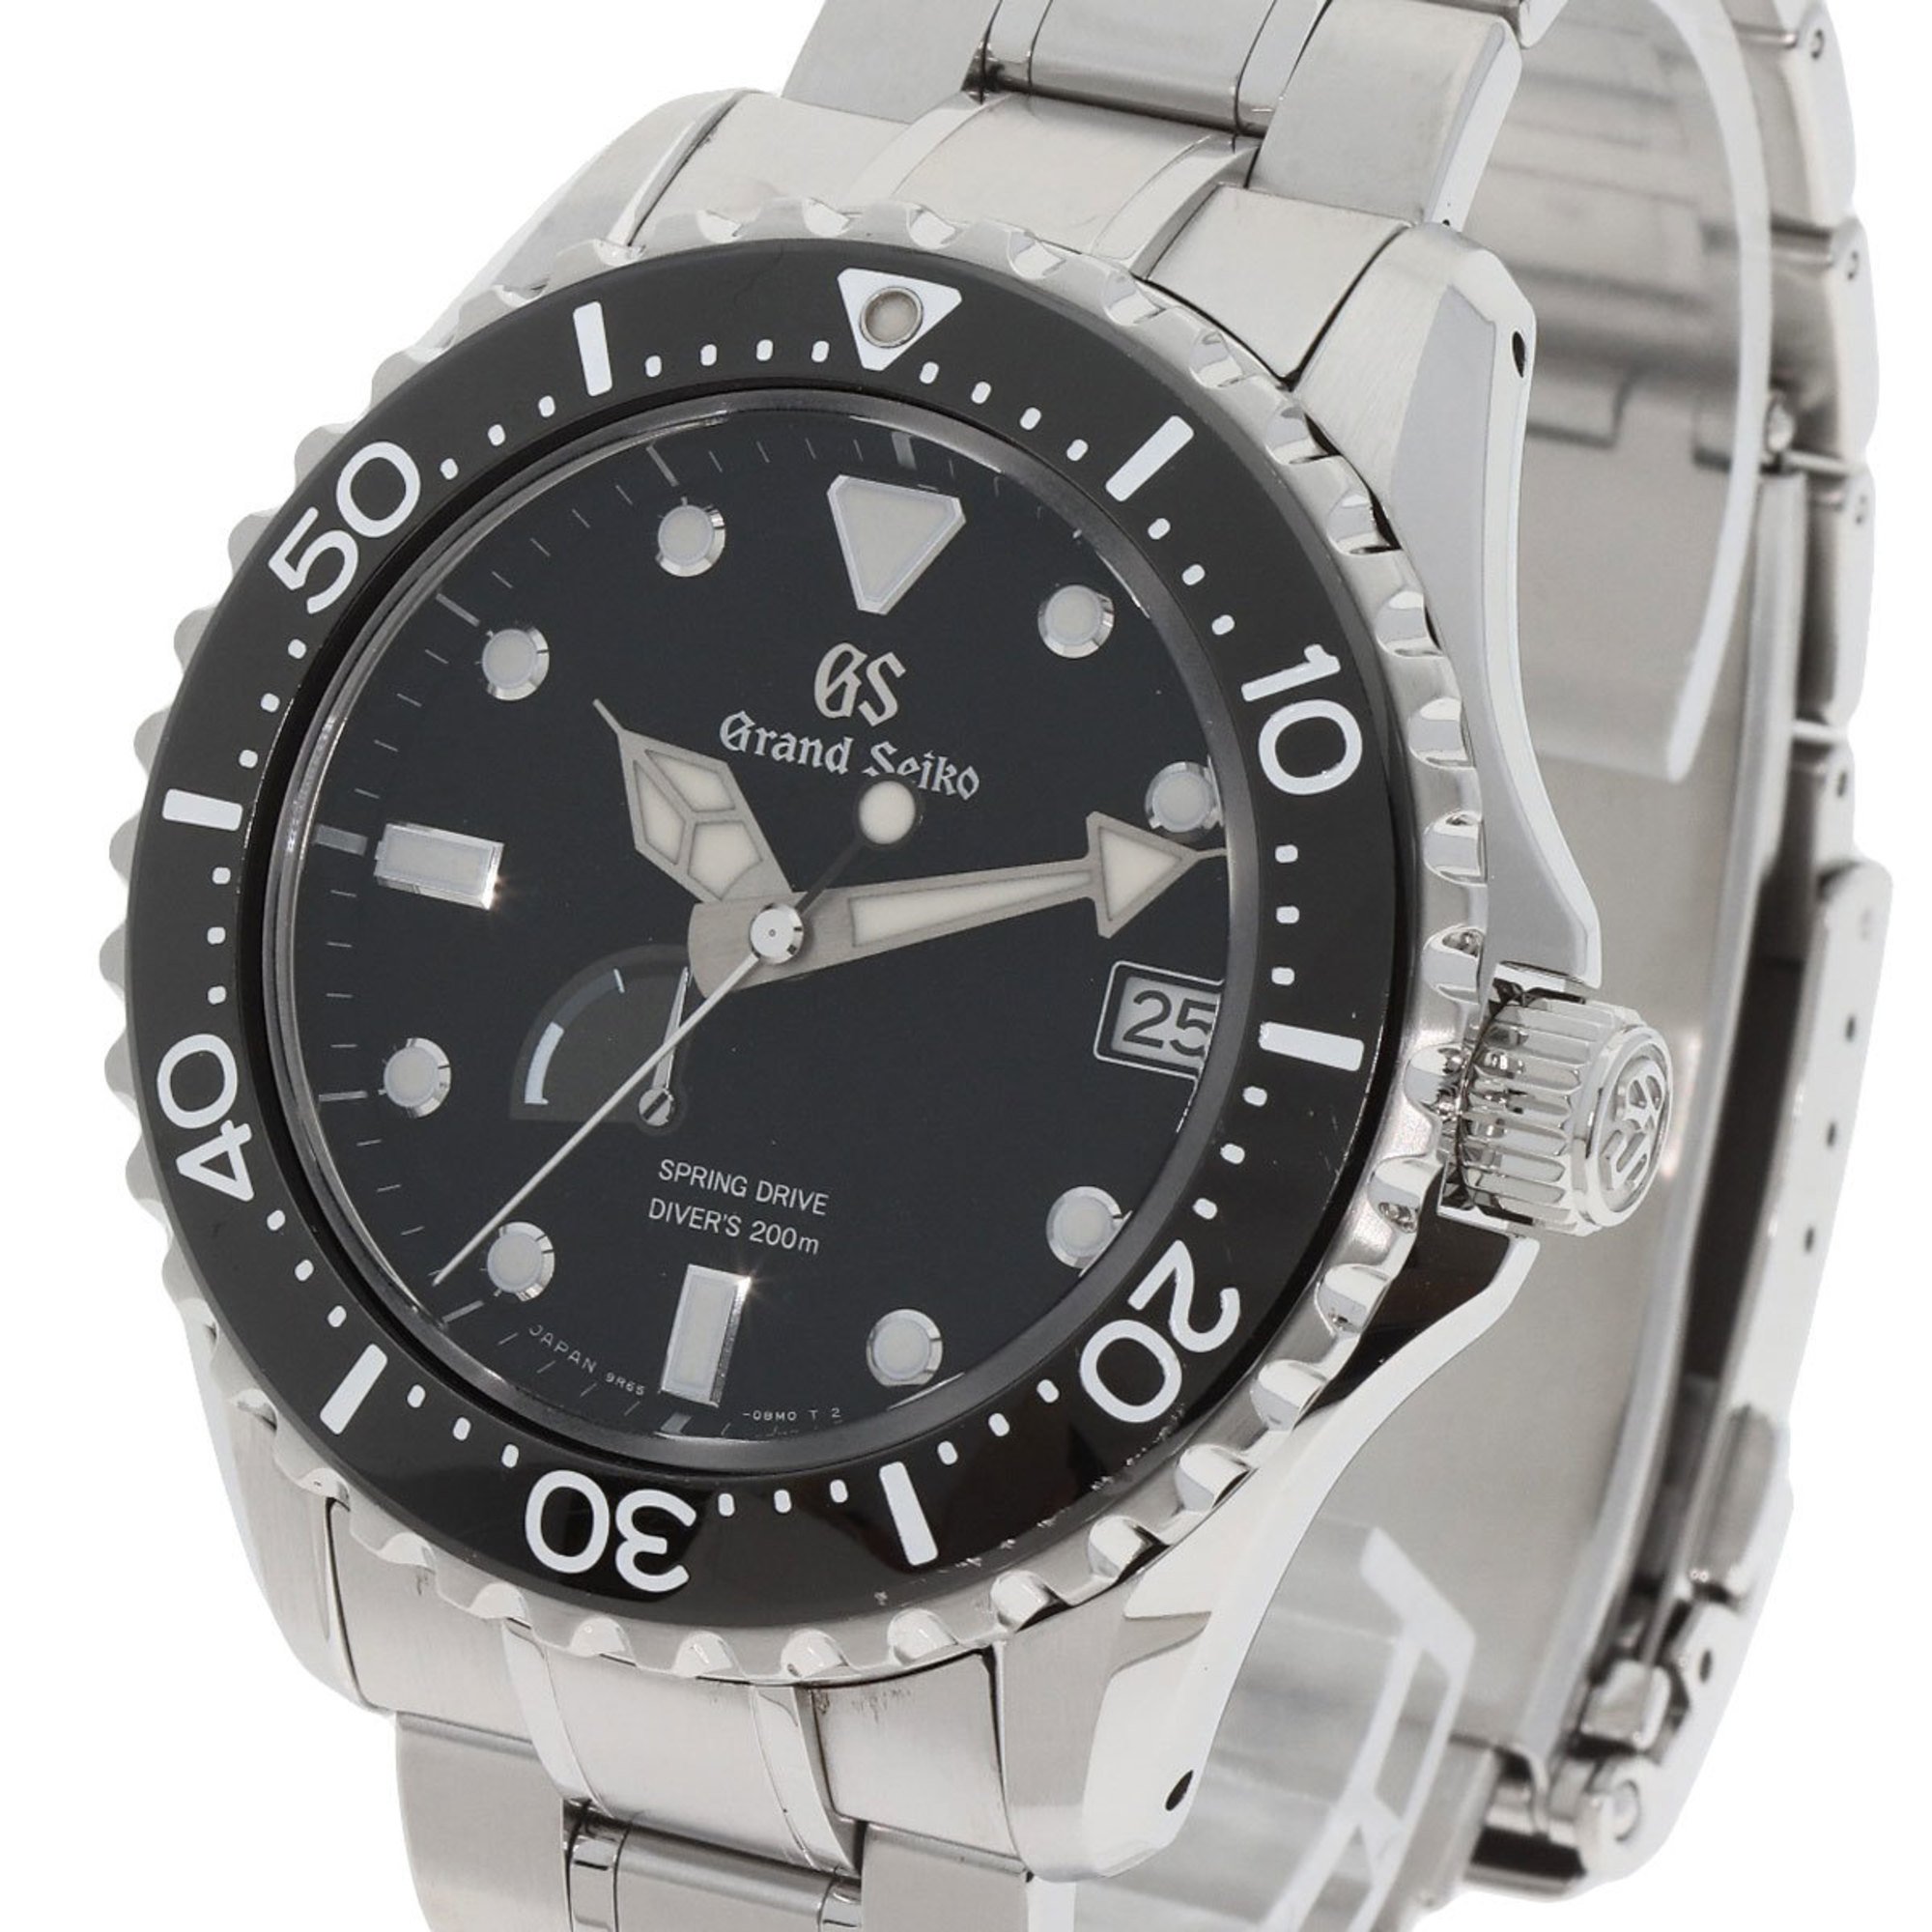 Seiko SBGA029 9R65-0AM0 Grand Spring Drive Diver's Watch Stainless Steel/SS Men's SEIKO